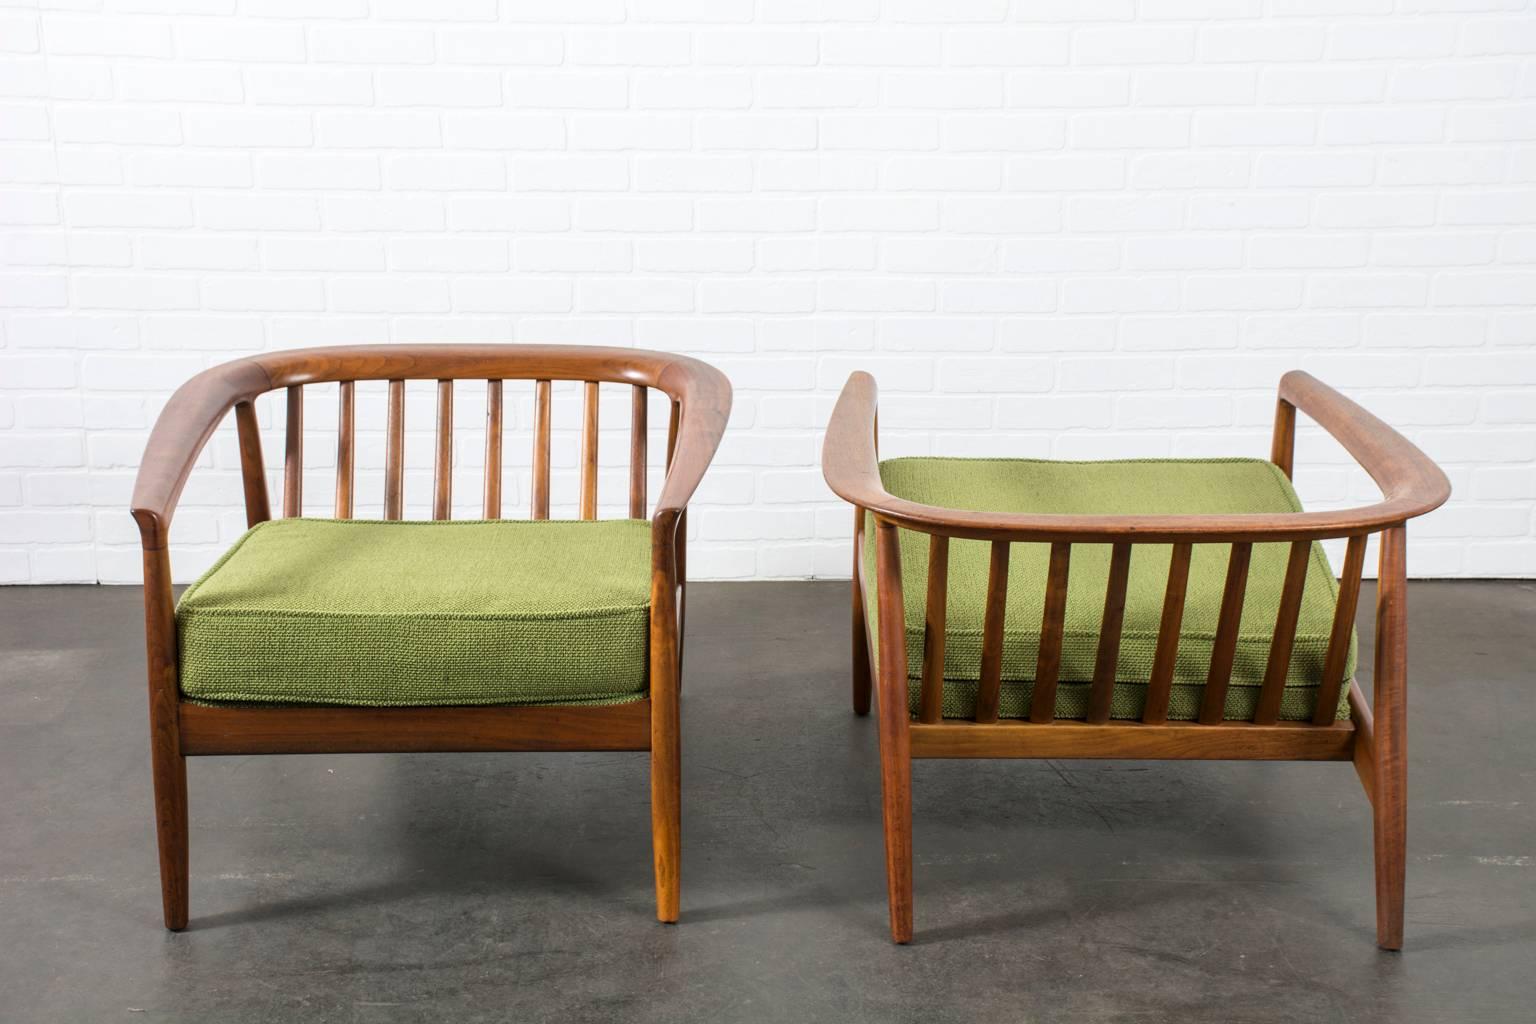 Scandinavian Modern Pair of Lounge Chairs by Folke Ohlsson for Dux